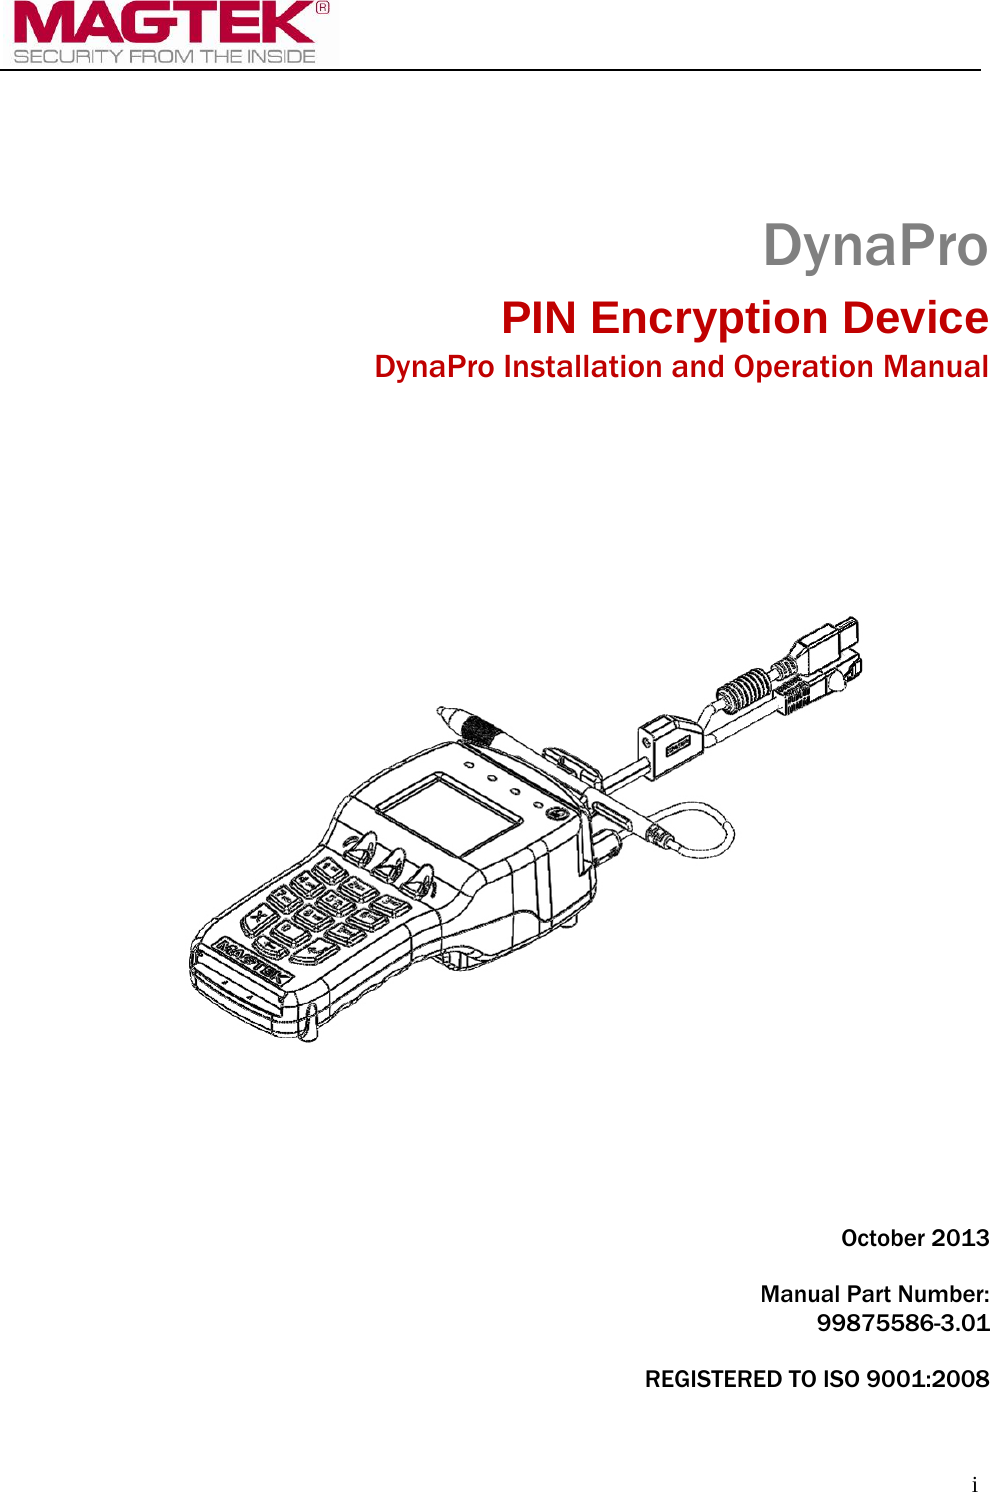  i DynaPro PIN Encryption Device DynaPro Installation and Operation Manual  October 2013  Manual Part Number:  99875586-3.01  REGISTERED TO ISO 9001:2008 